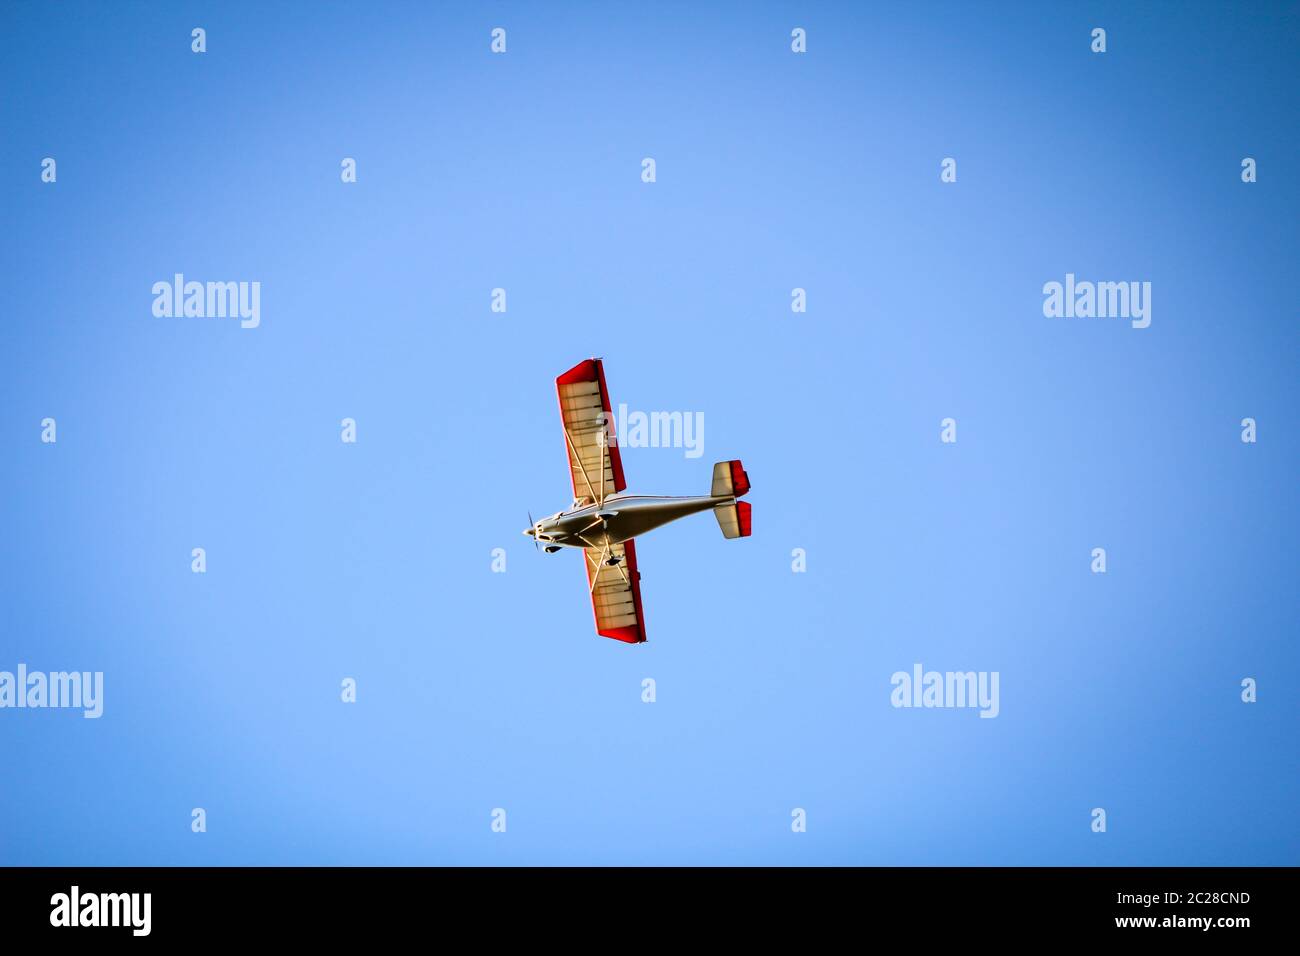 a small airplane in the blue sky Stock Photo